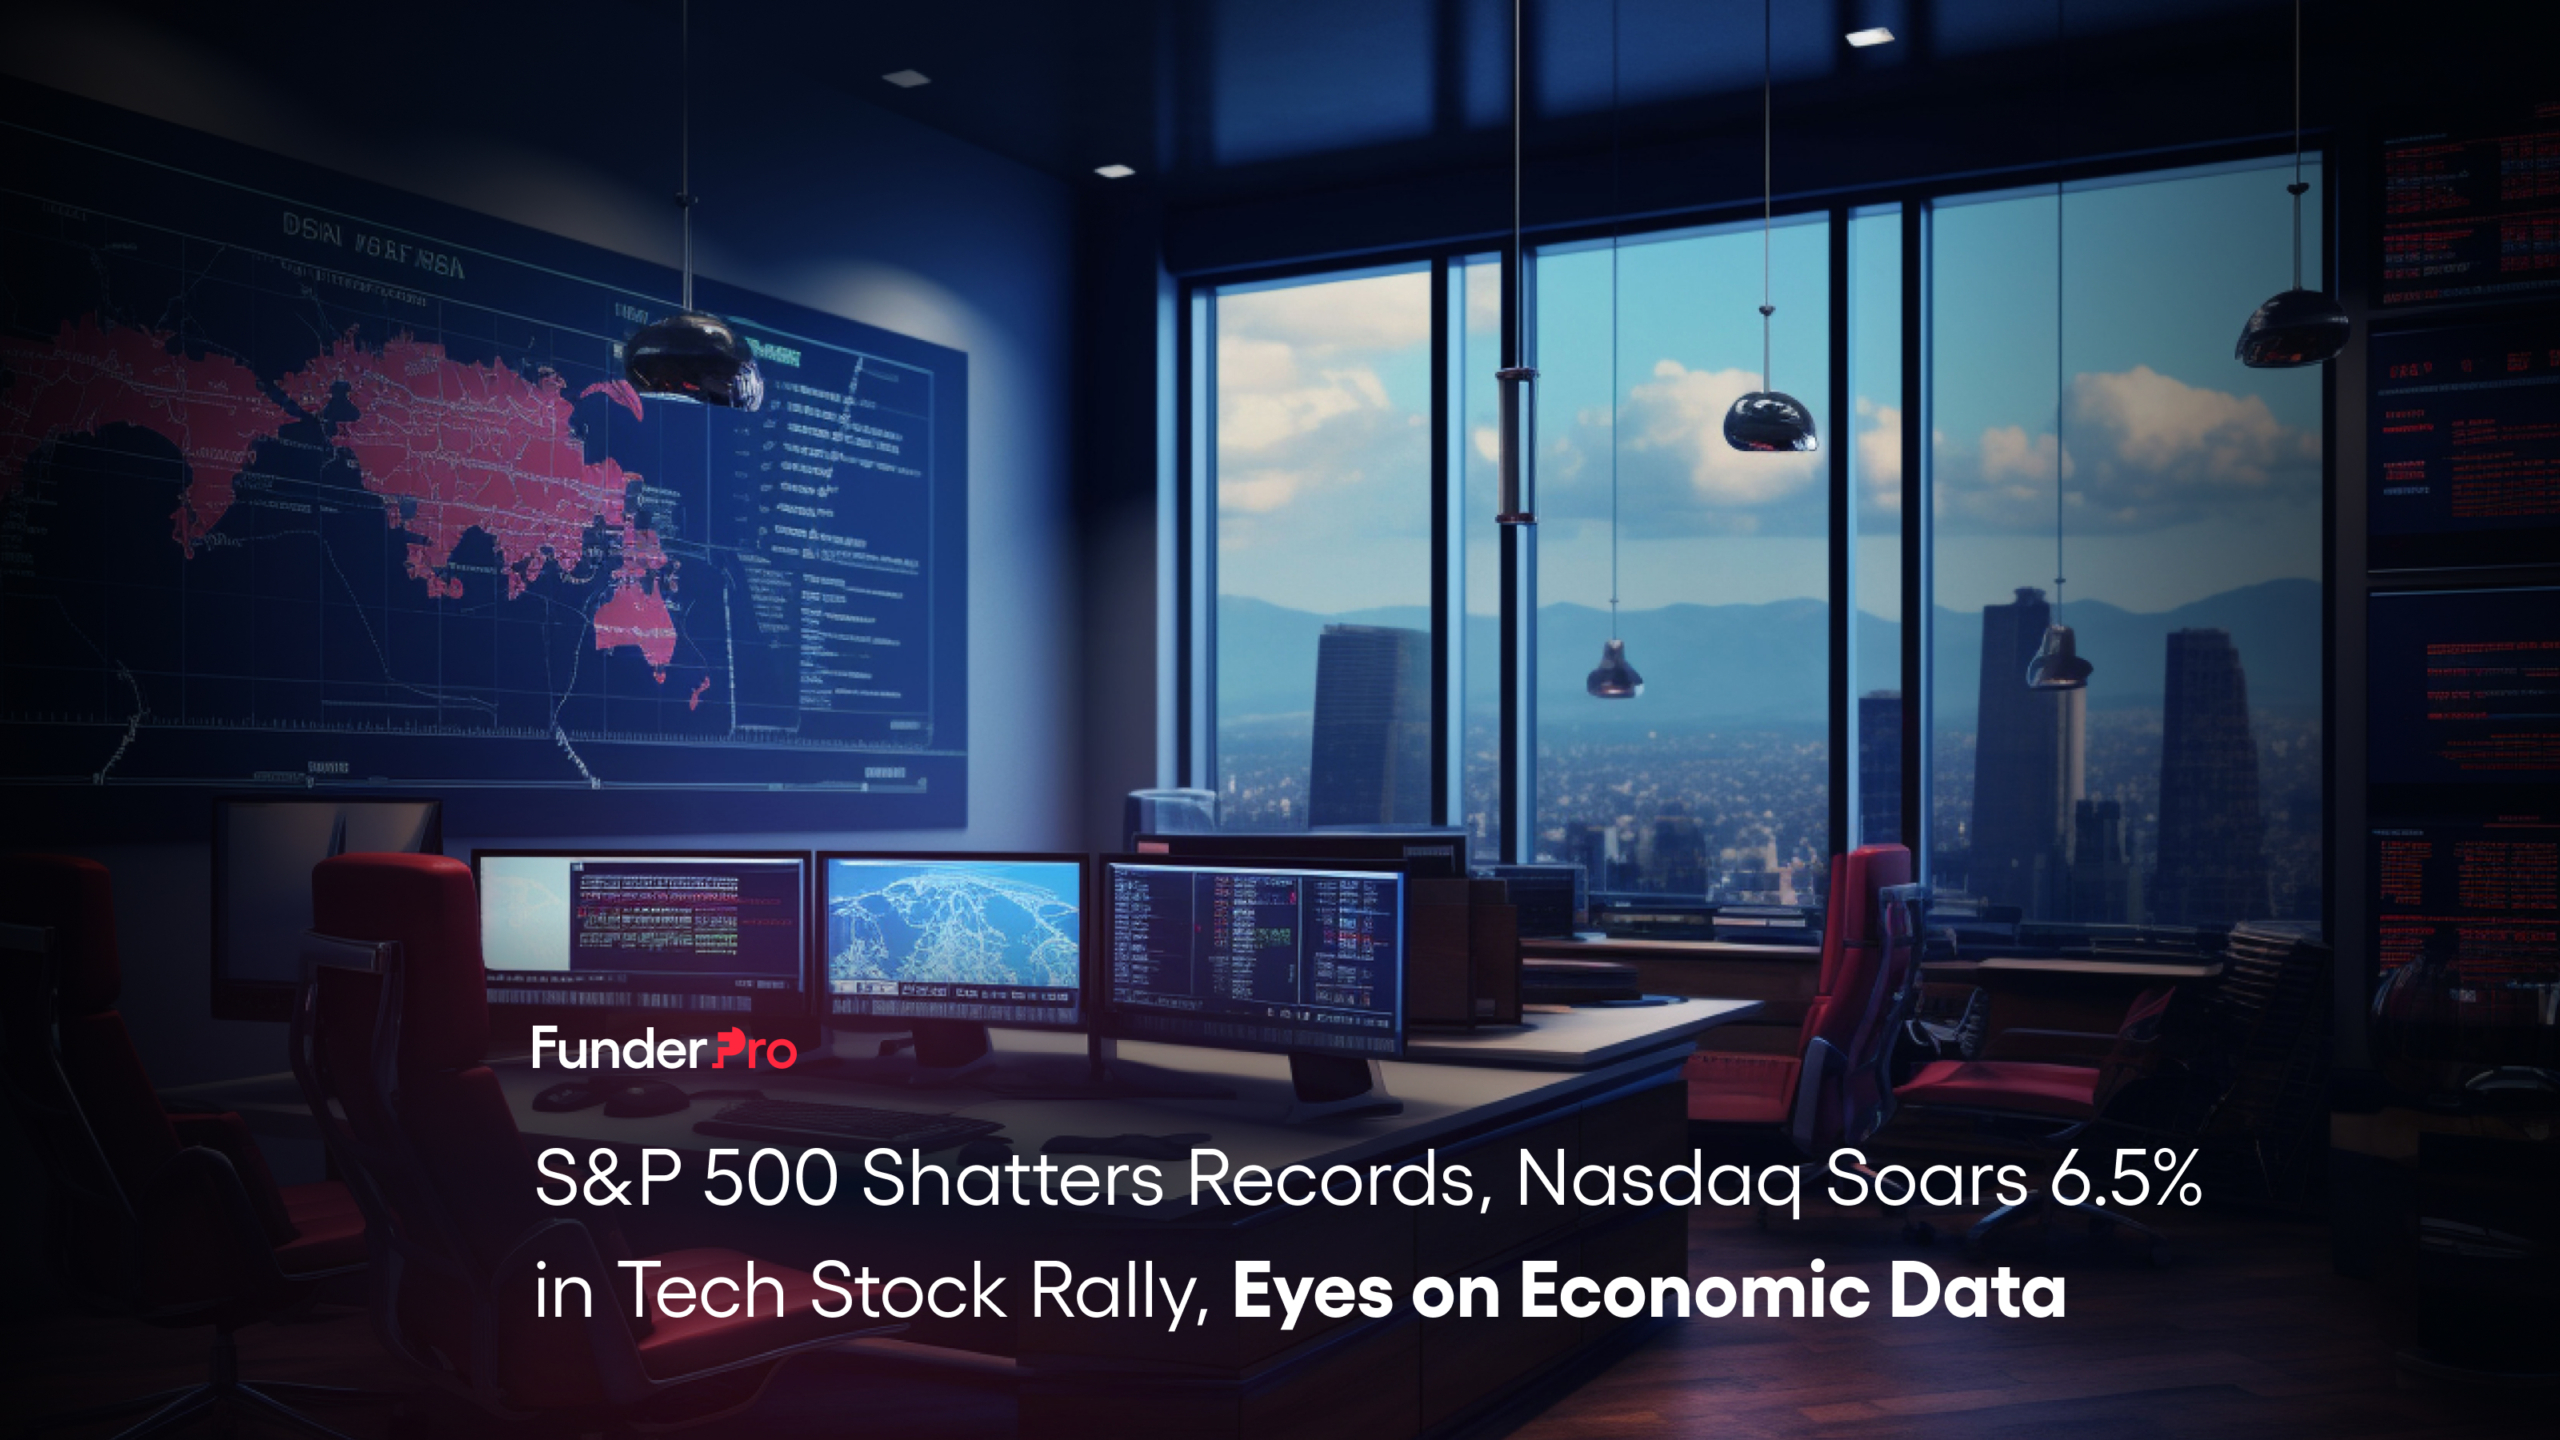 S&P 500 Shatters Records, Nasdaq Soars 6.5% in Tech Stock Rally, Eyes on Economic Data